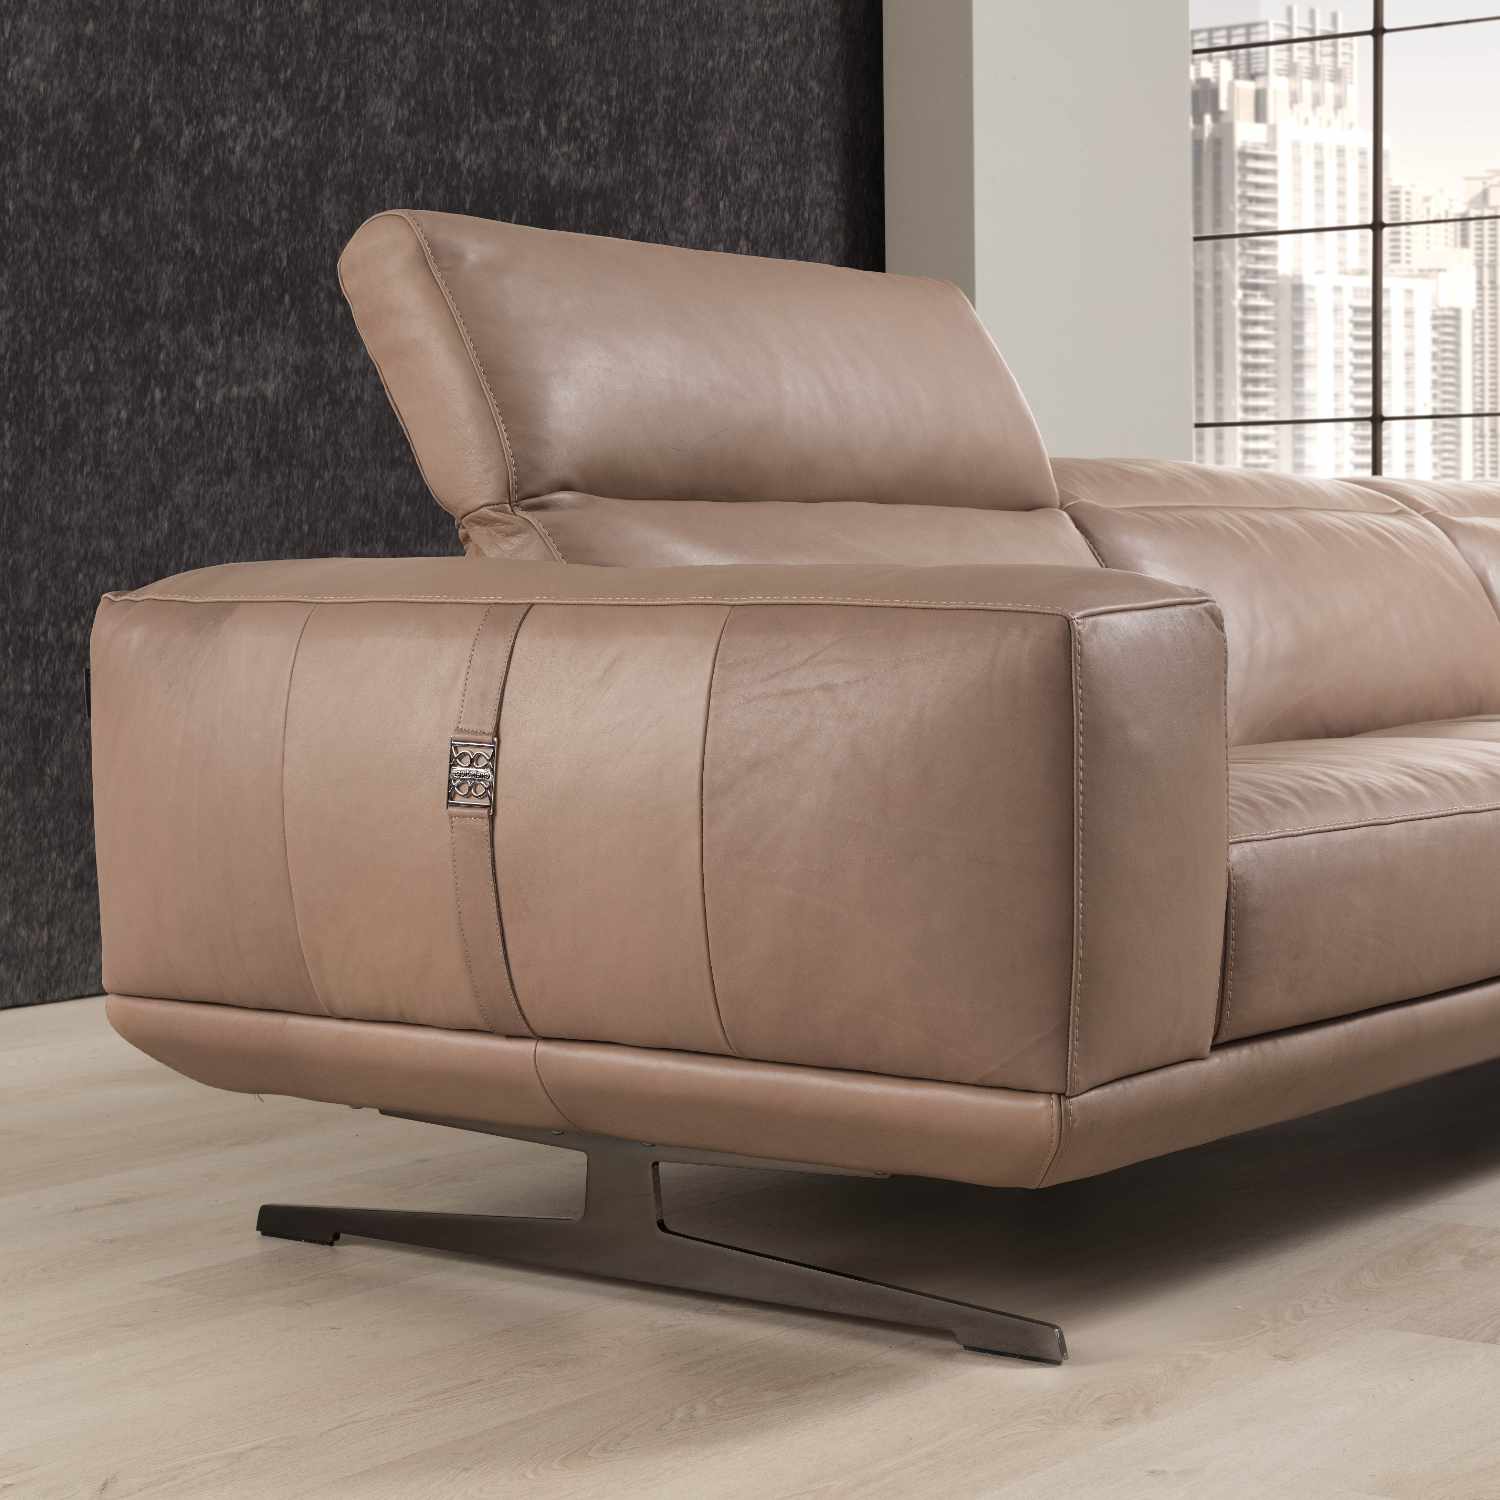 Contemporary Beverley leather sofa 100% made in italy